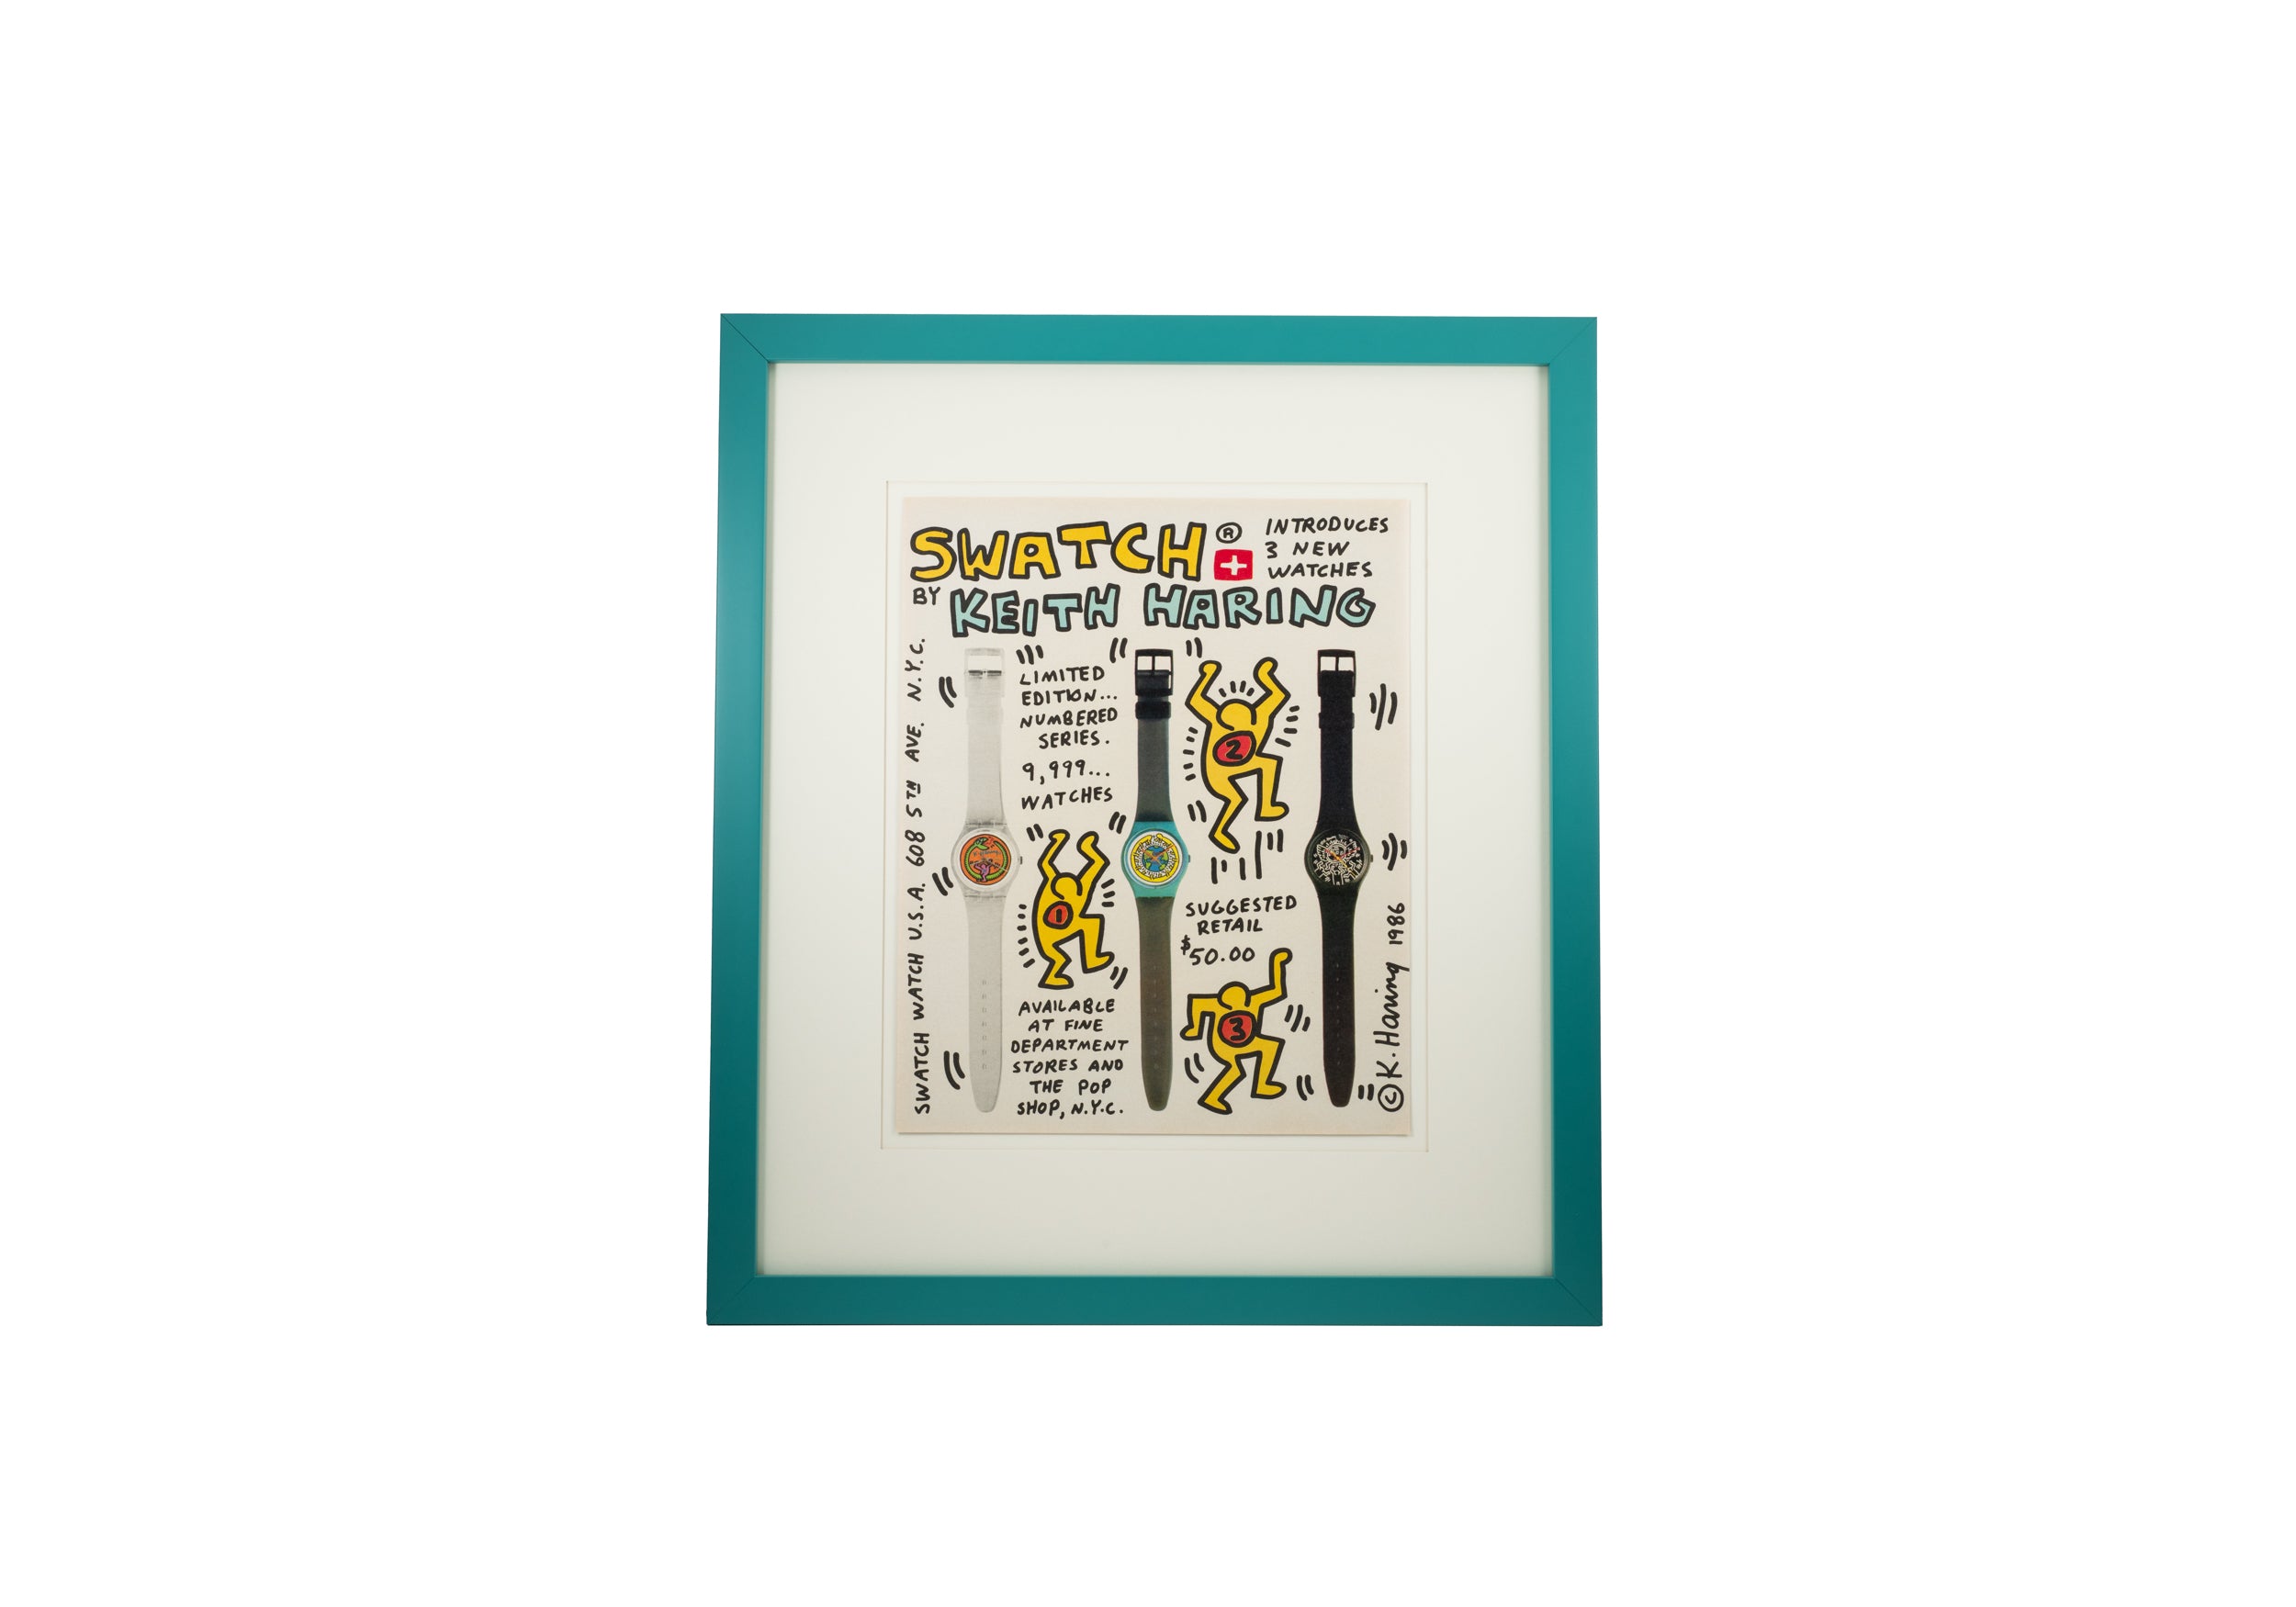 Timex decorates watches with Keith Haring street art